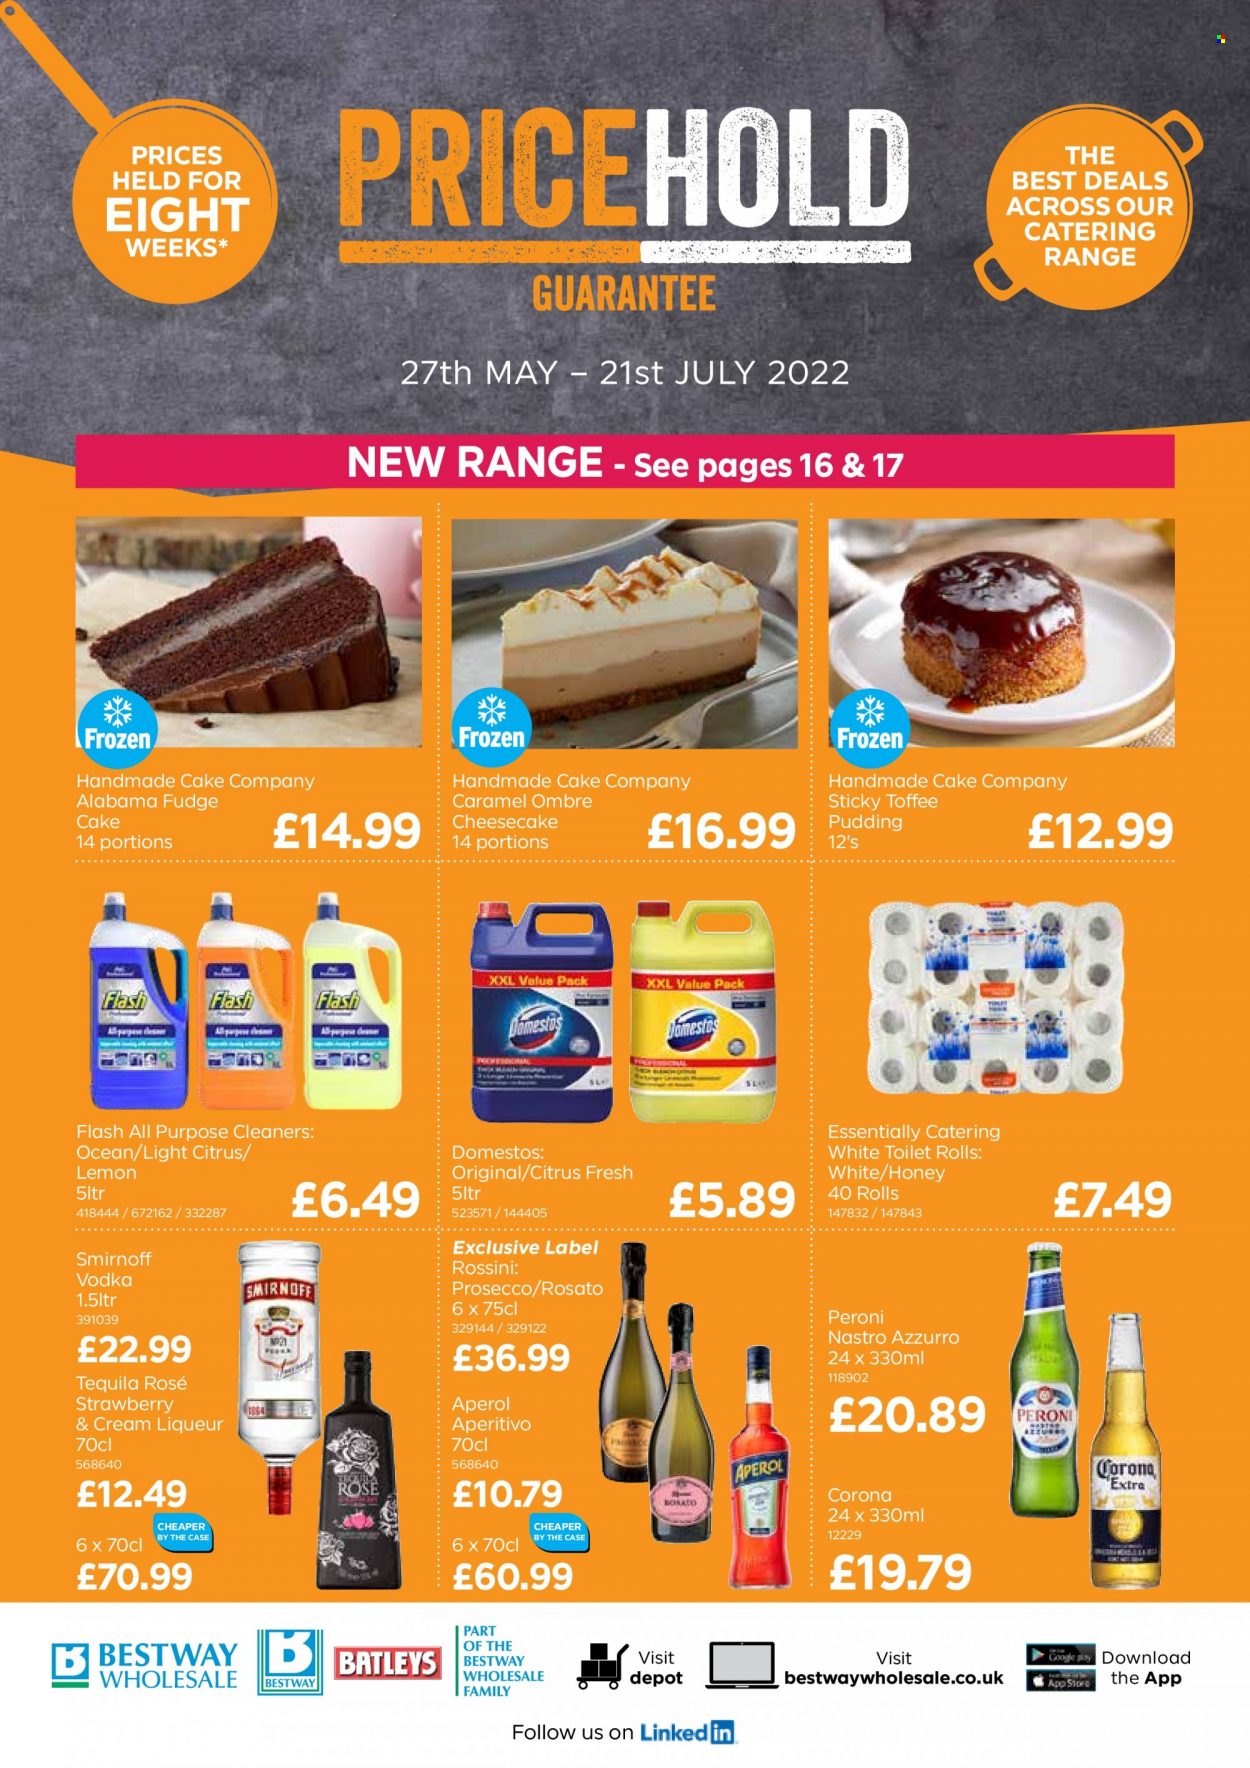 thumbnail - Bestway offer  - 27/05/2022 - 21/07/2022 - Sales products - Corona Extra, beer, Peroni, cake, cheesecake, pudding, fudge, toffee, caramel, honey, prosecco, wine, liqueur, Smirnoff, tequila, vodka, Aperol, toilet paper, Domestos. Page 1.